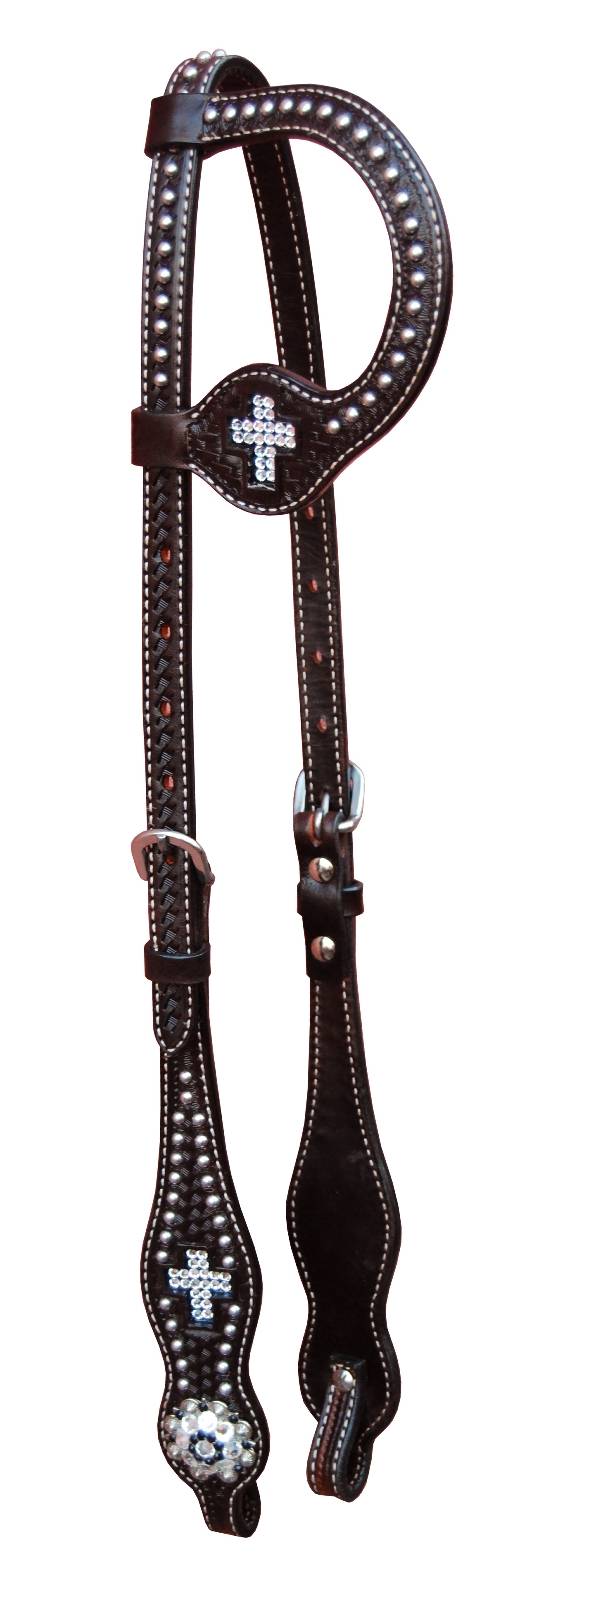 468935DKOILHRSE Turn-Two One Ear Headstall - St. Francis sku 468935DKOILHRSE